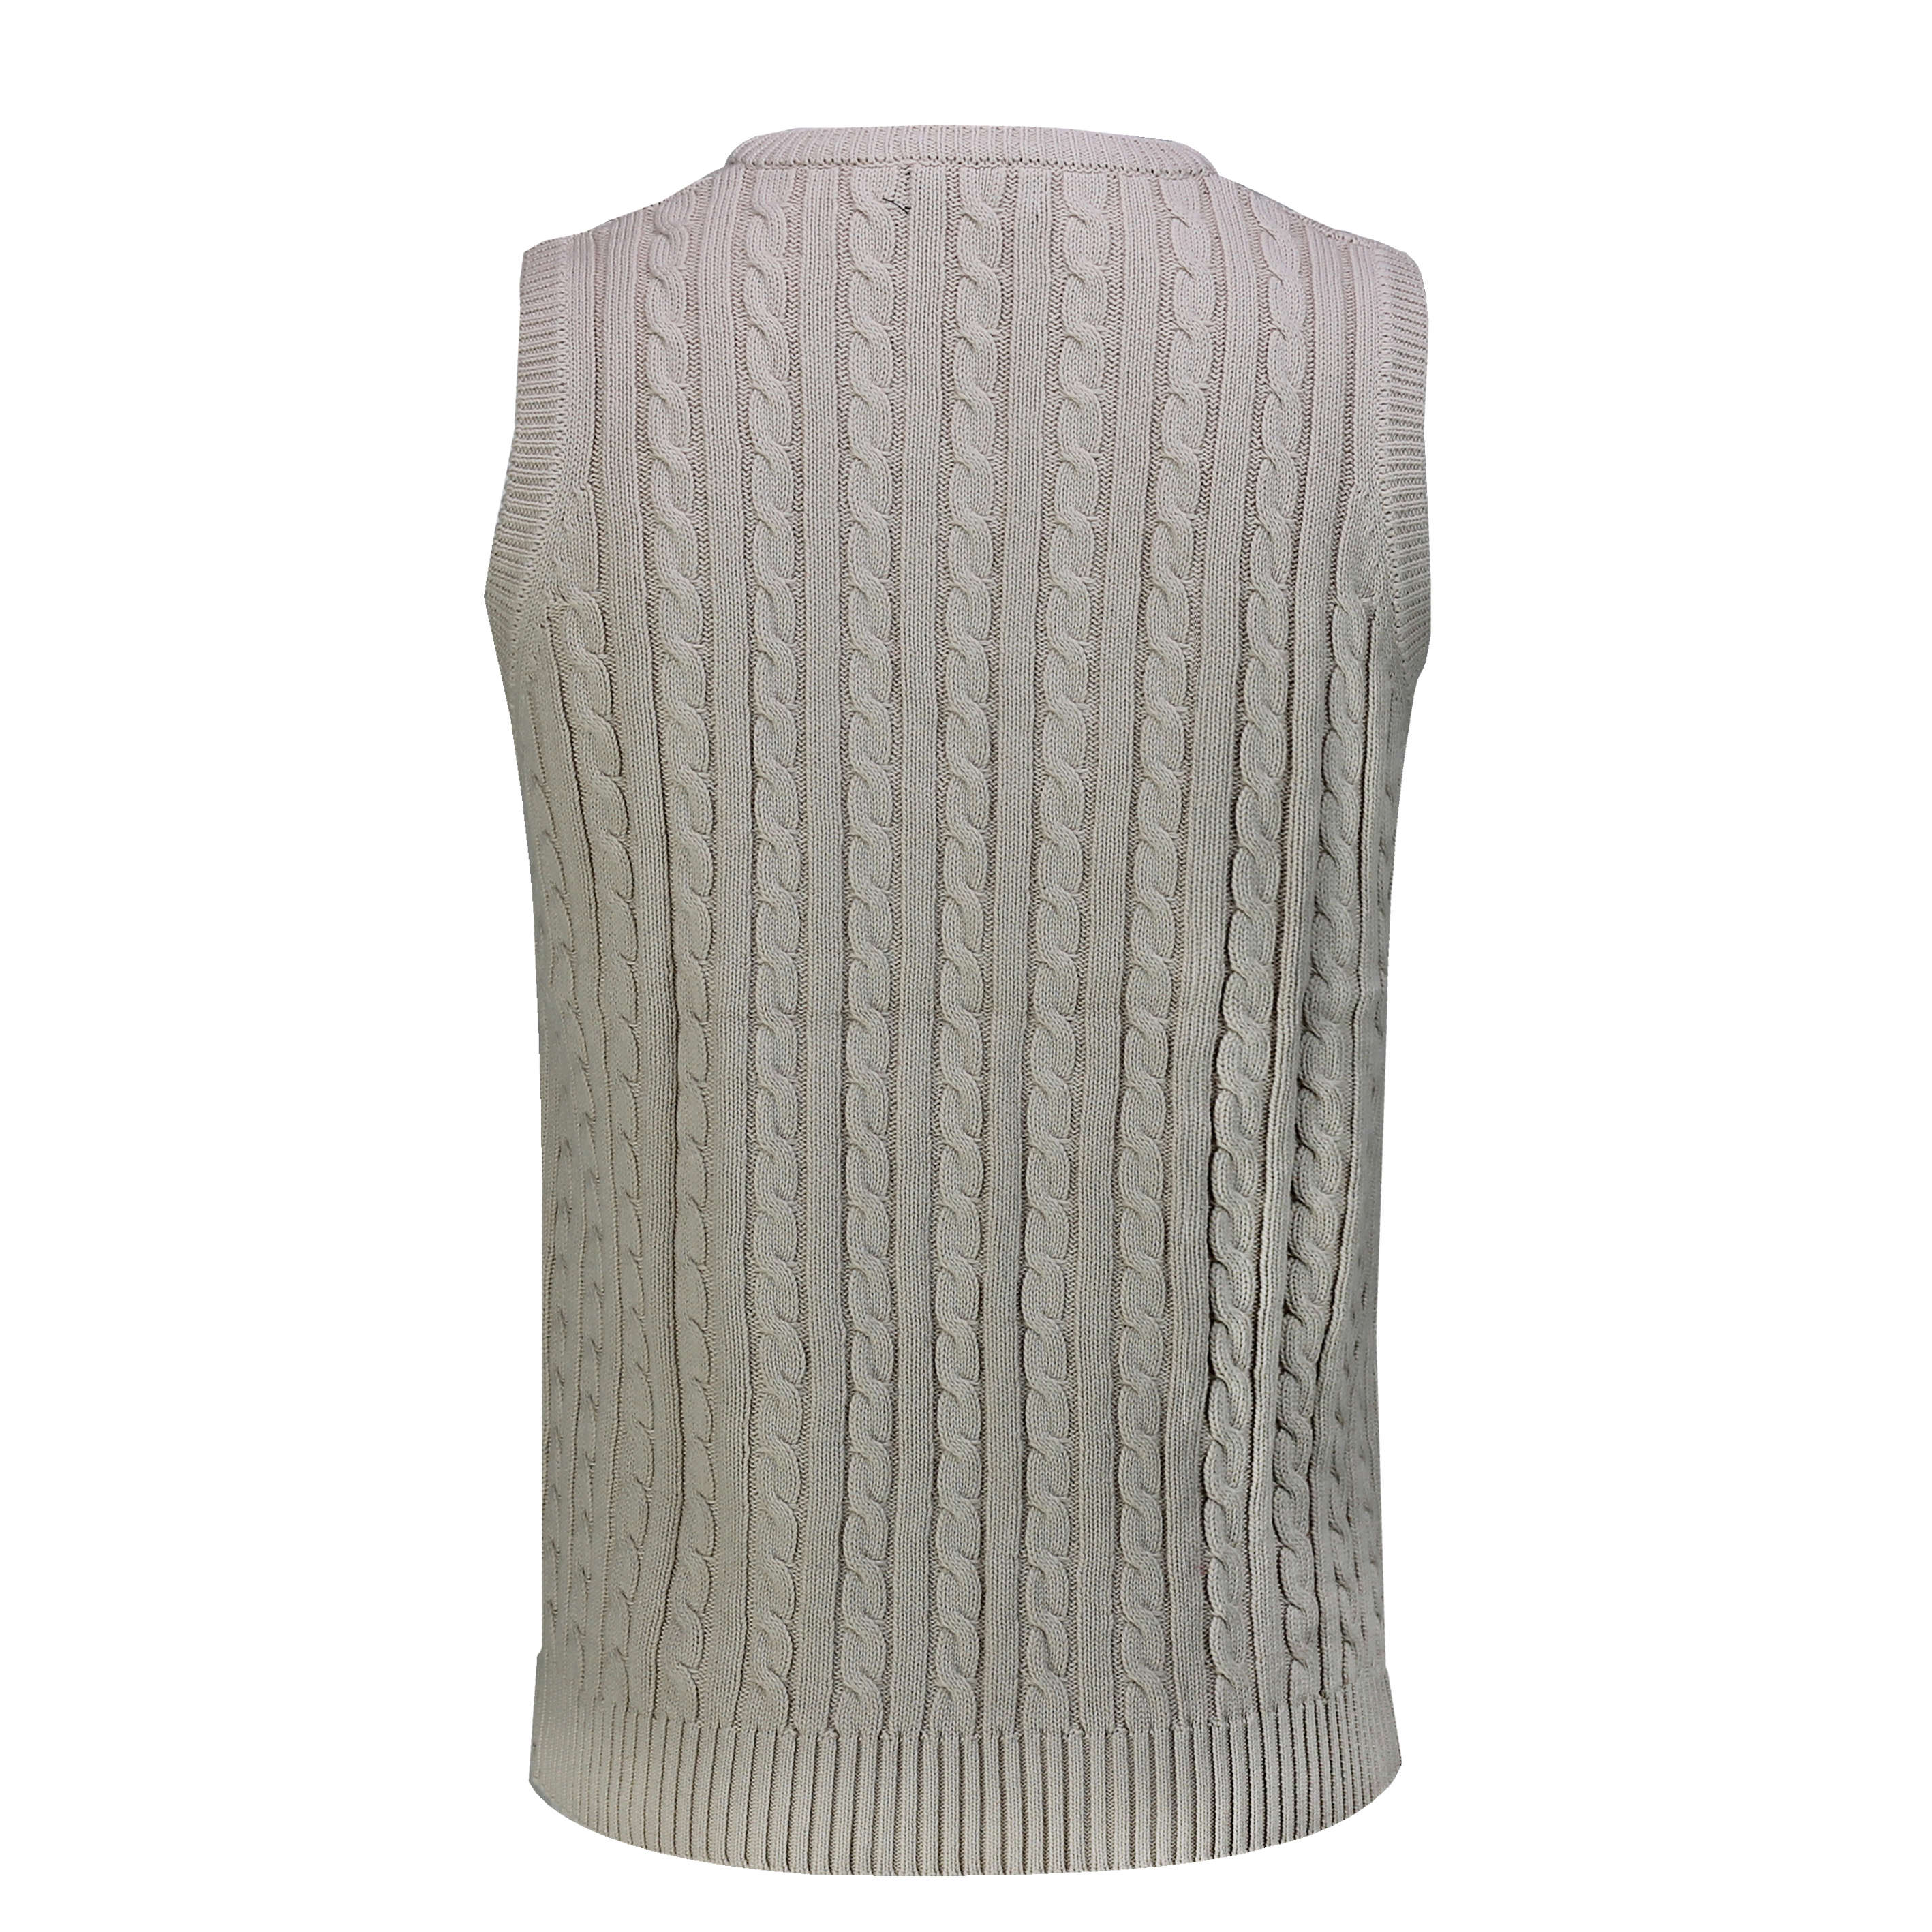 Mens Classic Cable Knitted Sleeveless V Neck Jumper Smart Casual ...